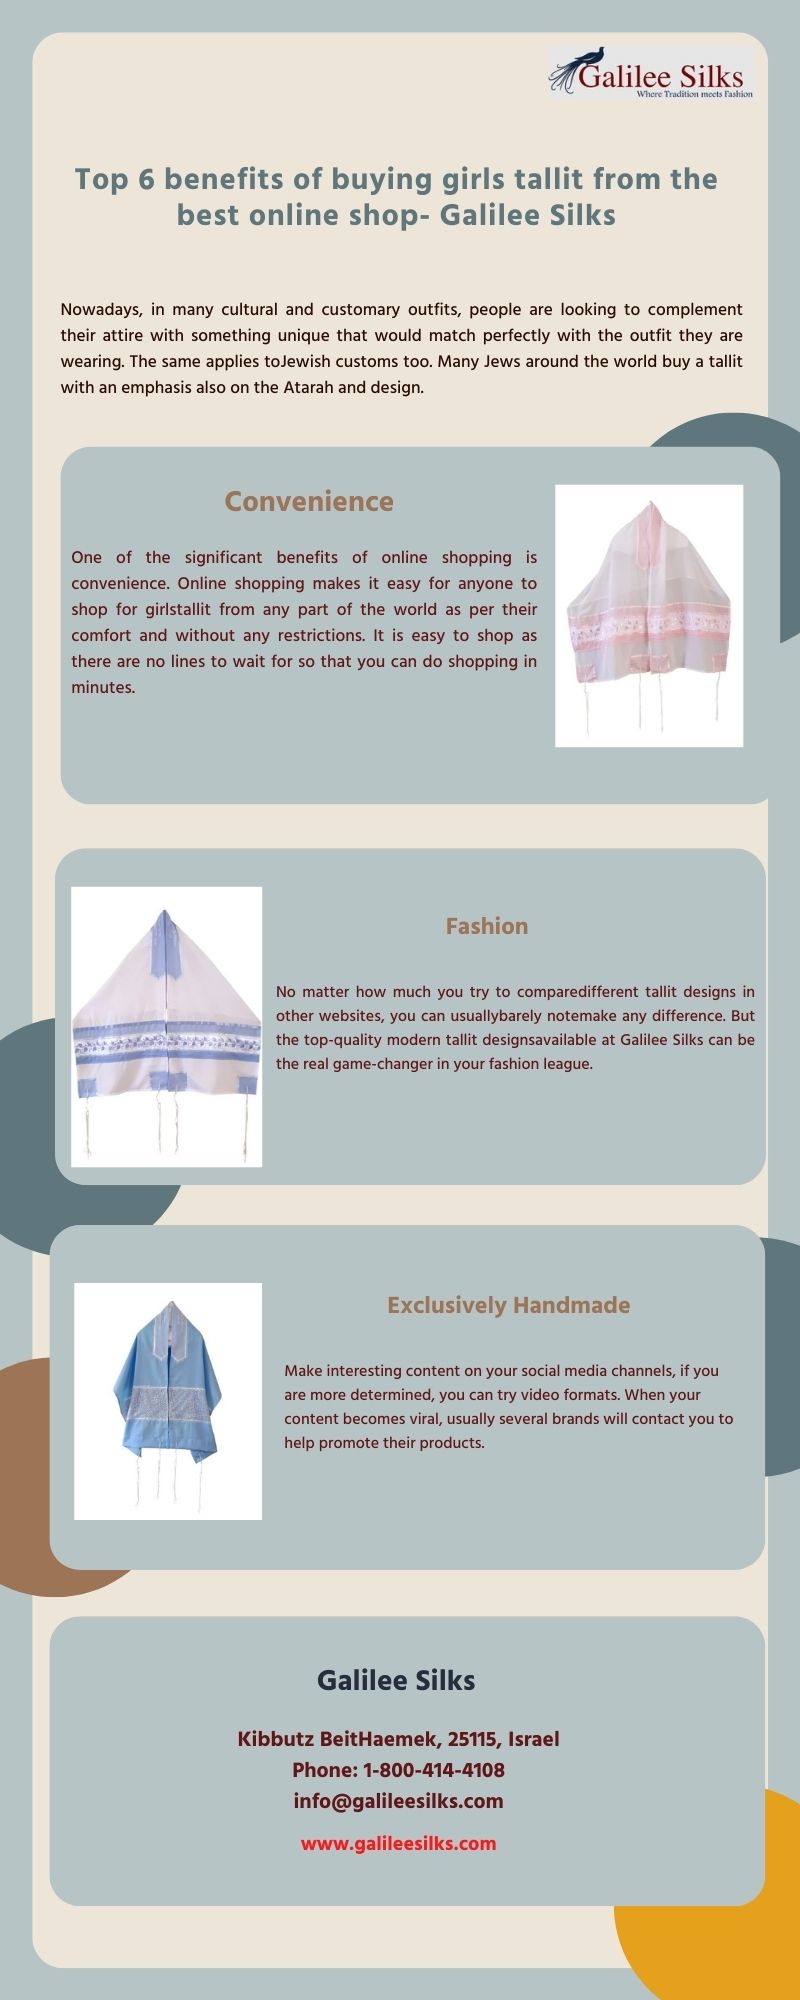 Top 6 benefits of buying girls tallit from the best online shop- Galilee Silks Explore a wide range of unique and bestdesigns of girls tallit at affordable prices from the online store of Galilee Silks. Get unique discounts and fast delivery options with every purchase. For more details, visit: https://bit.ly/3qL7aLj
 by amramrafi